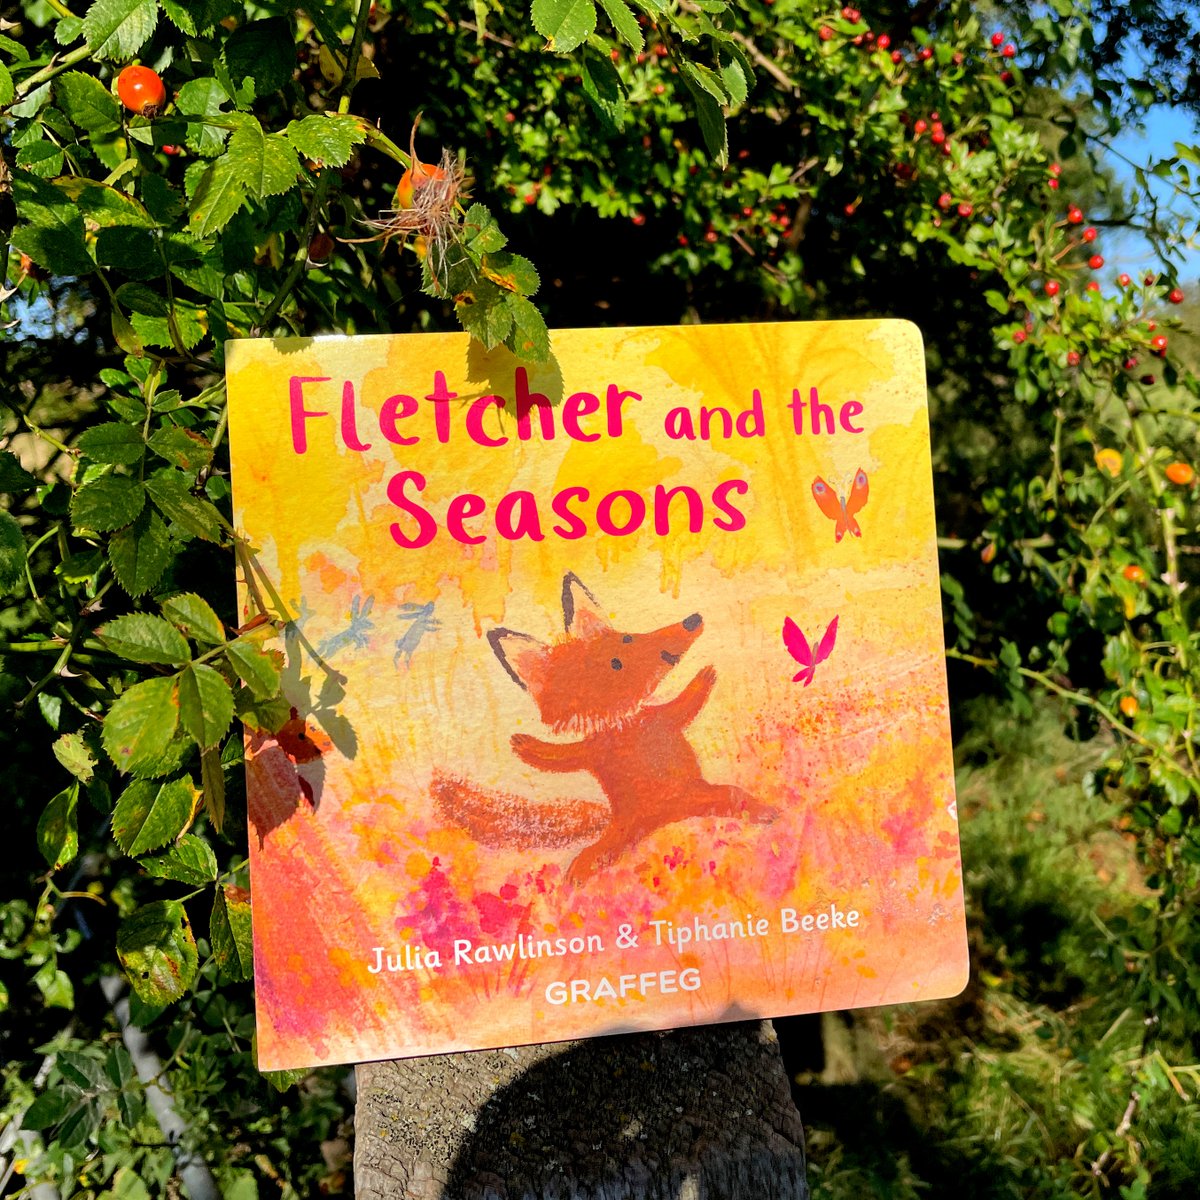 One week until Fletcher’s first board book hits the shelves! Photo taken back when the rose hips and hawthorn berries were at their brightest – lucky, as today is more puddle-jumping than book-photographing weather #FletchersFourSeasons #FletcherAndTheSeasons #BoardBook